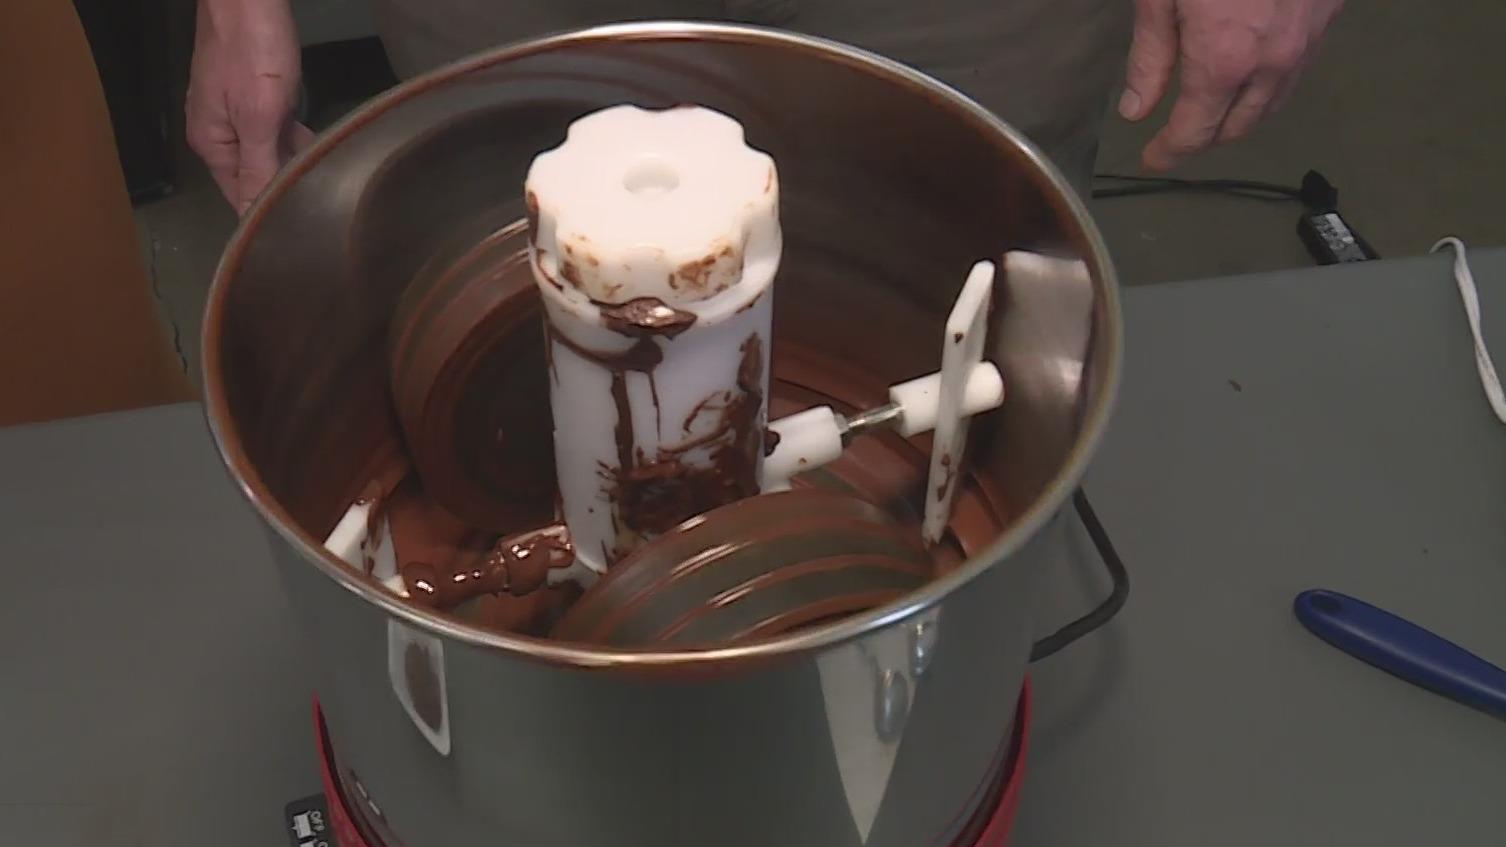 A local company is making chocolate with science - CBS News